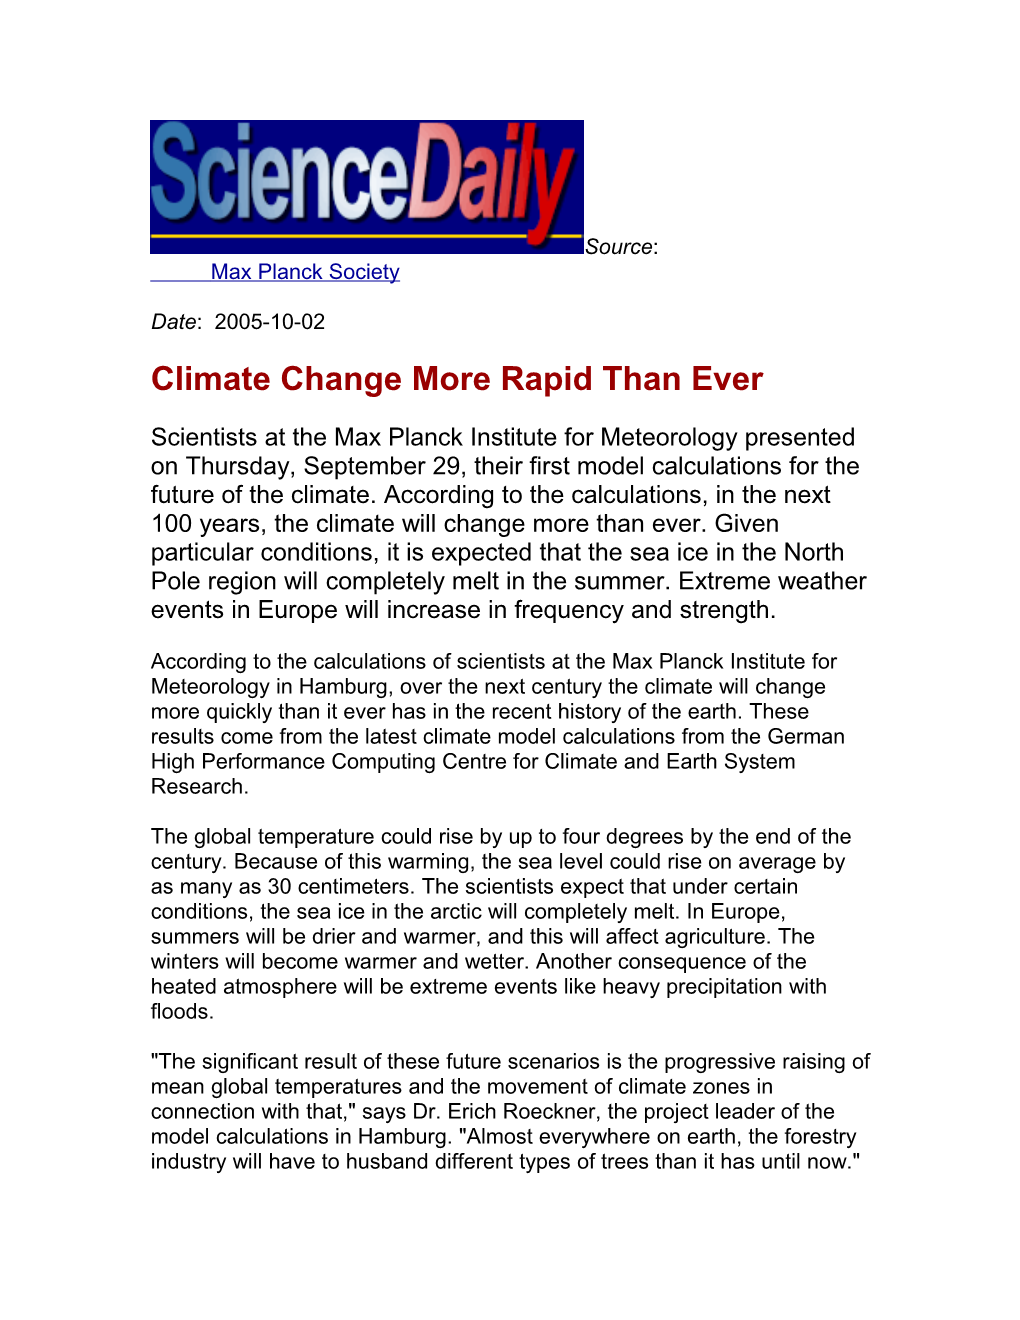 Climate Change More Rapid Than Ever